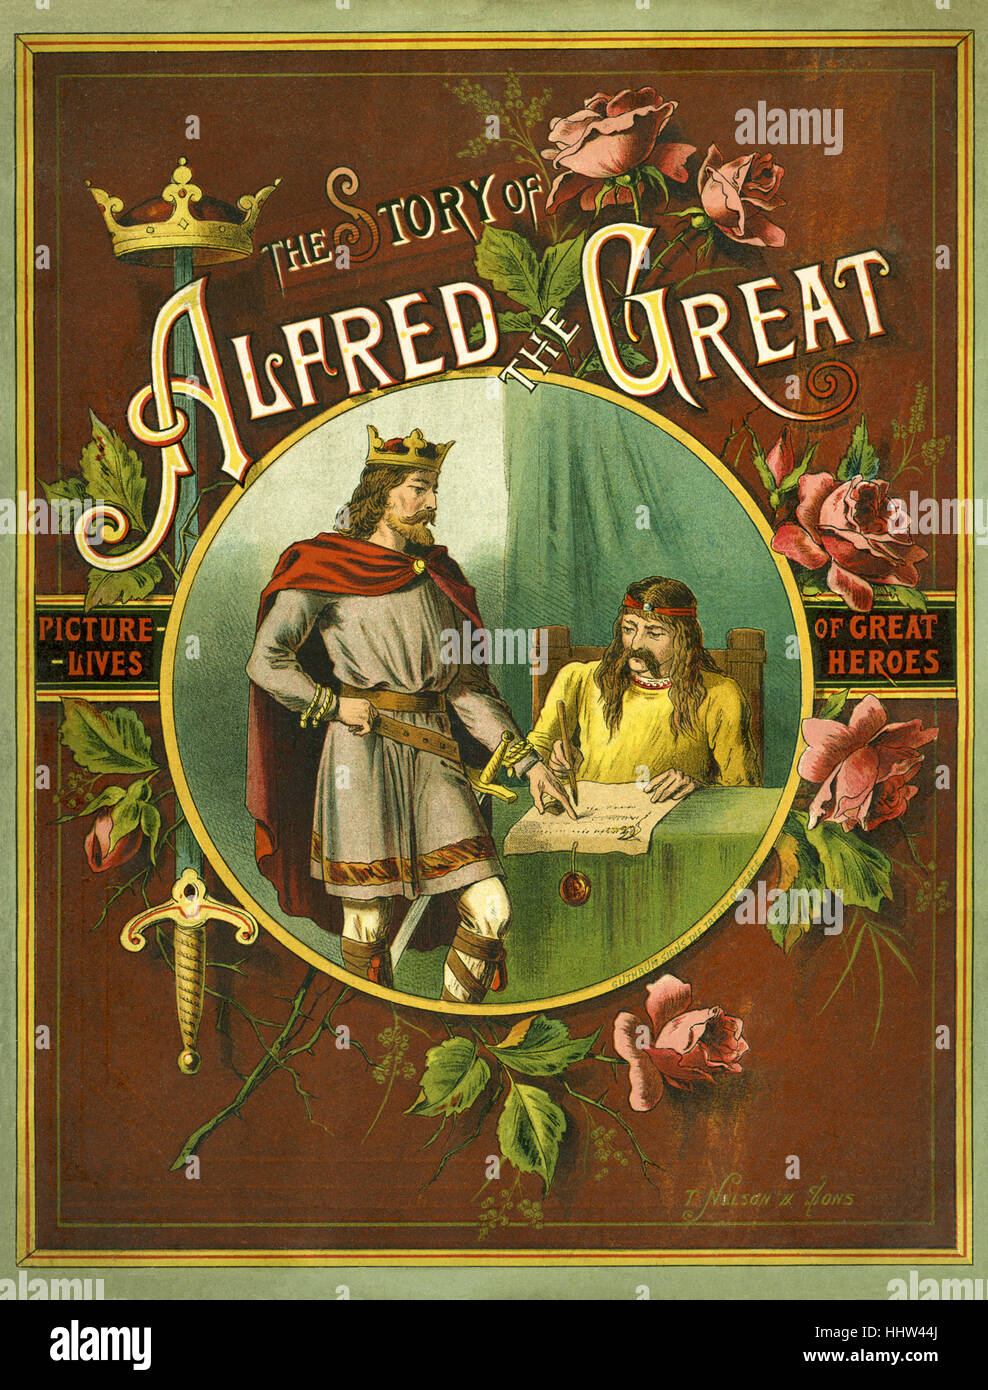 cover of The Story of Alfred The Great. Picture lives of great heroes. As King of Wessex defended his kingdom against the Viking attempt to conquer it - reigned 871 to 899. 849 – 26 October 899. Stock Photo